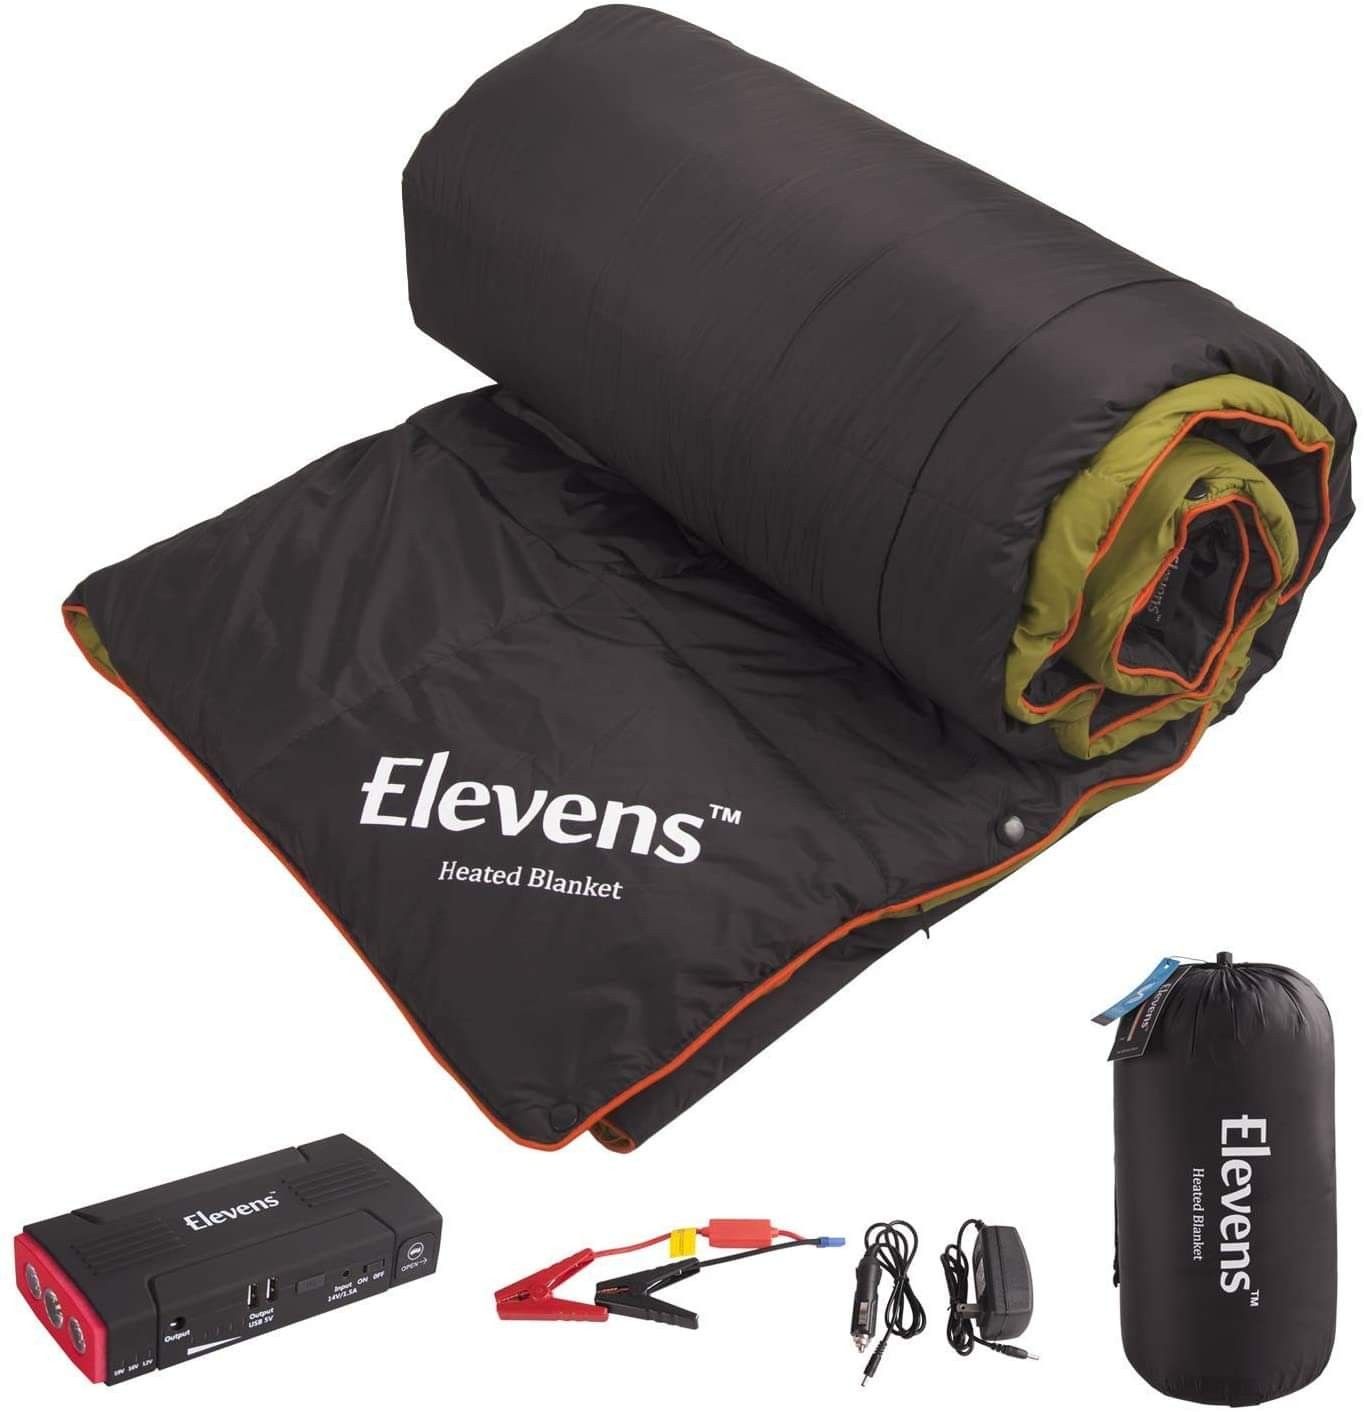 Lightweight Battery-Operated Heated Camping Blanket Sleeping Bag Alternative for Cold Weather,80"x54